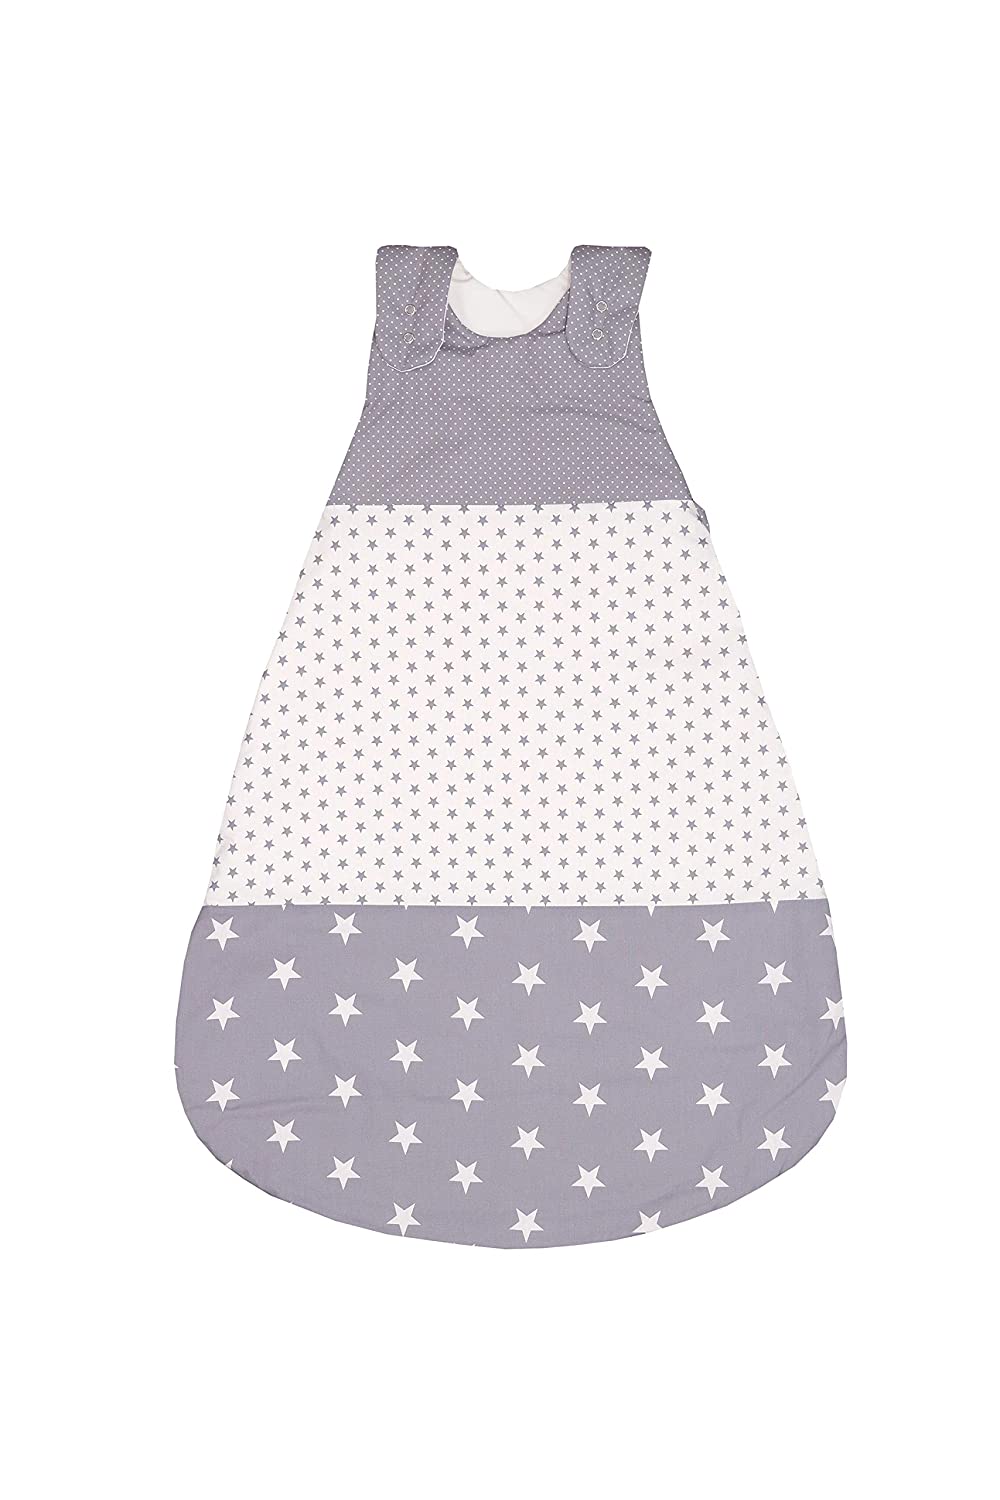 Ullenboom ® Baby Sleeping Bag 4 To 10 Months (Size 68/74) Grey Stars (Made 